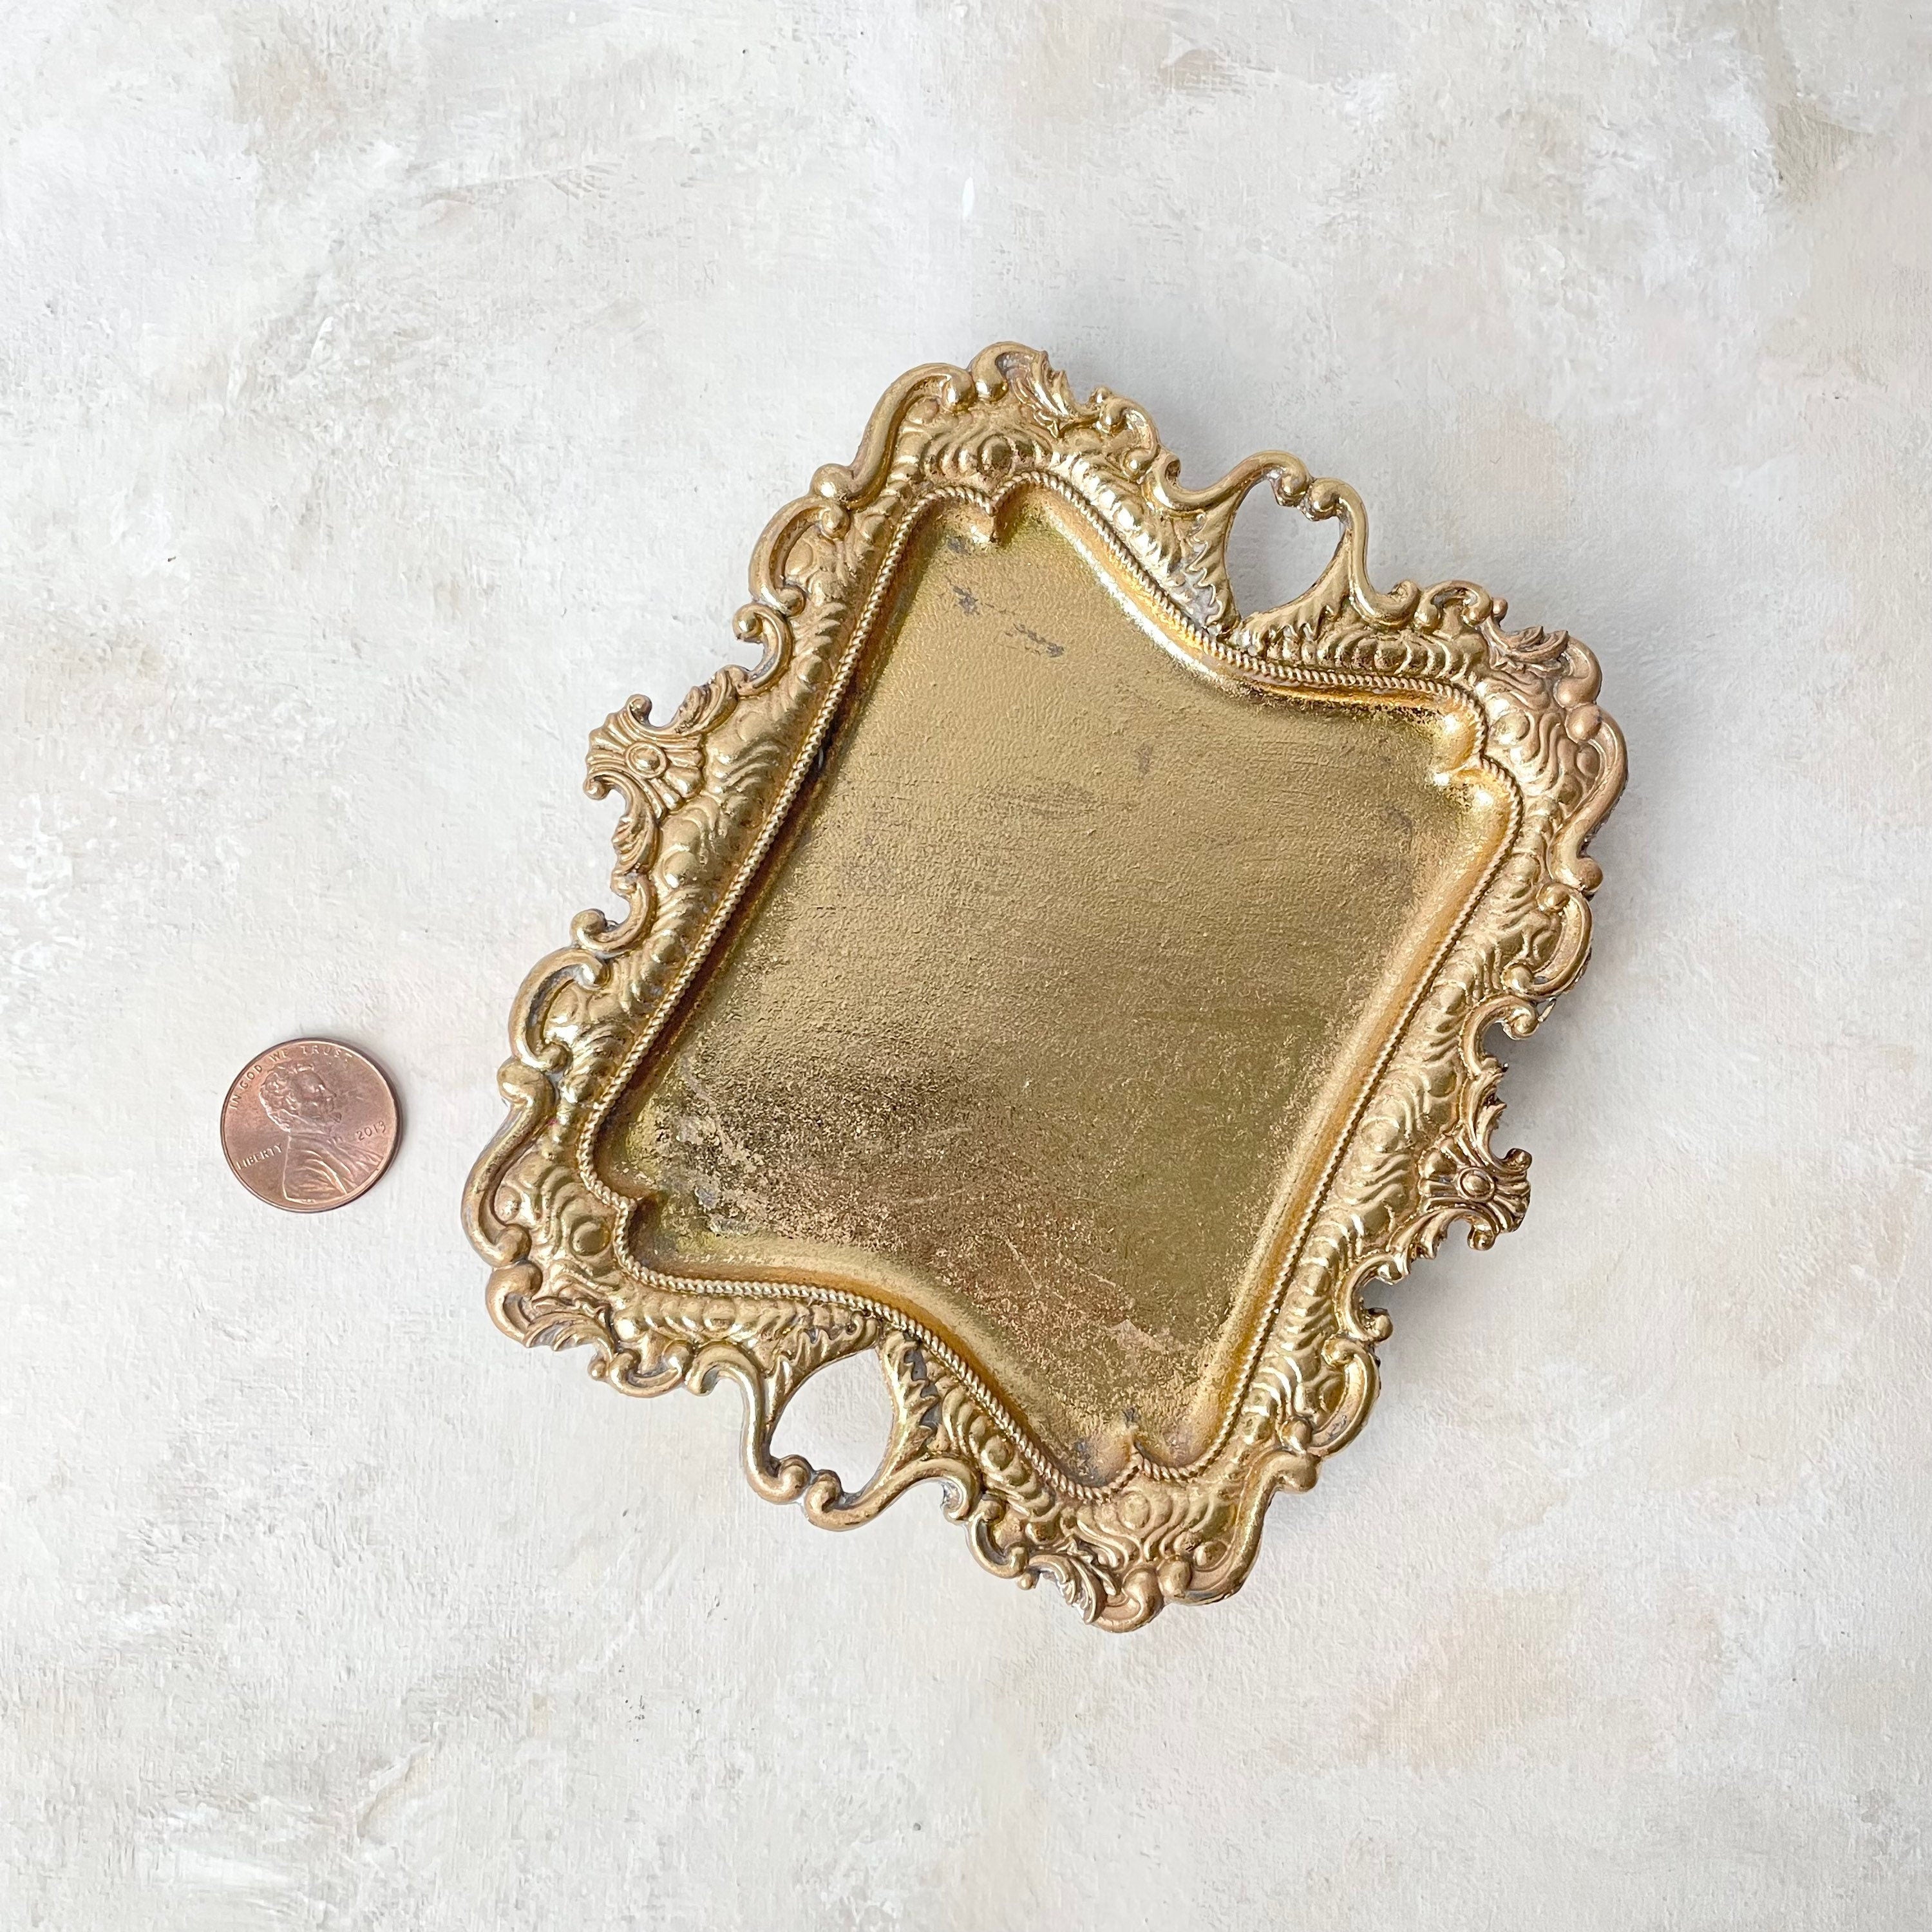 5 inch gold tray with penny beside for size reference - flat lay props from Champagne & GRIT